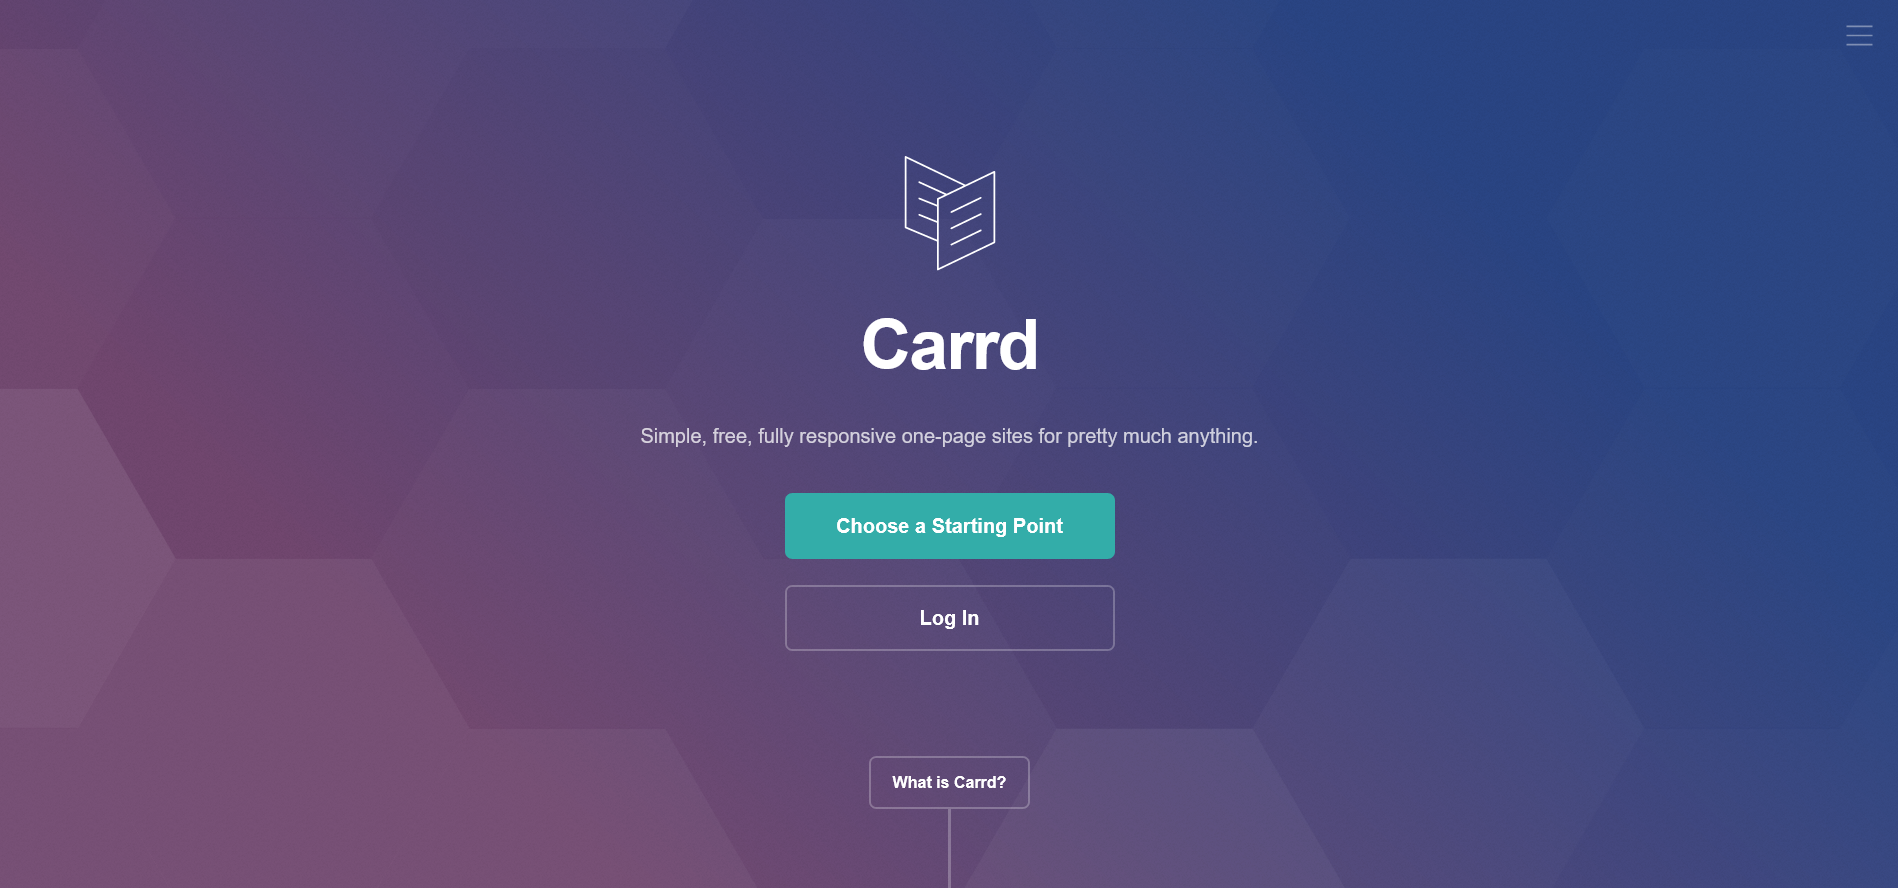 Carrd.co's homepage design.